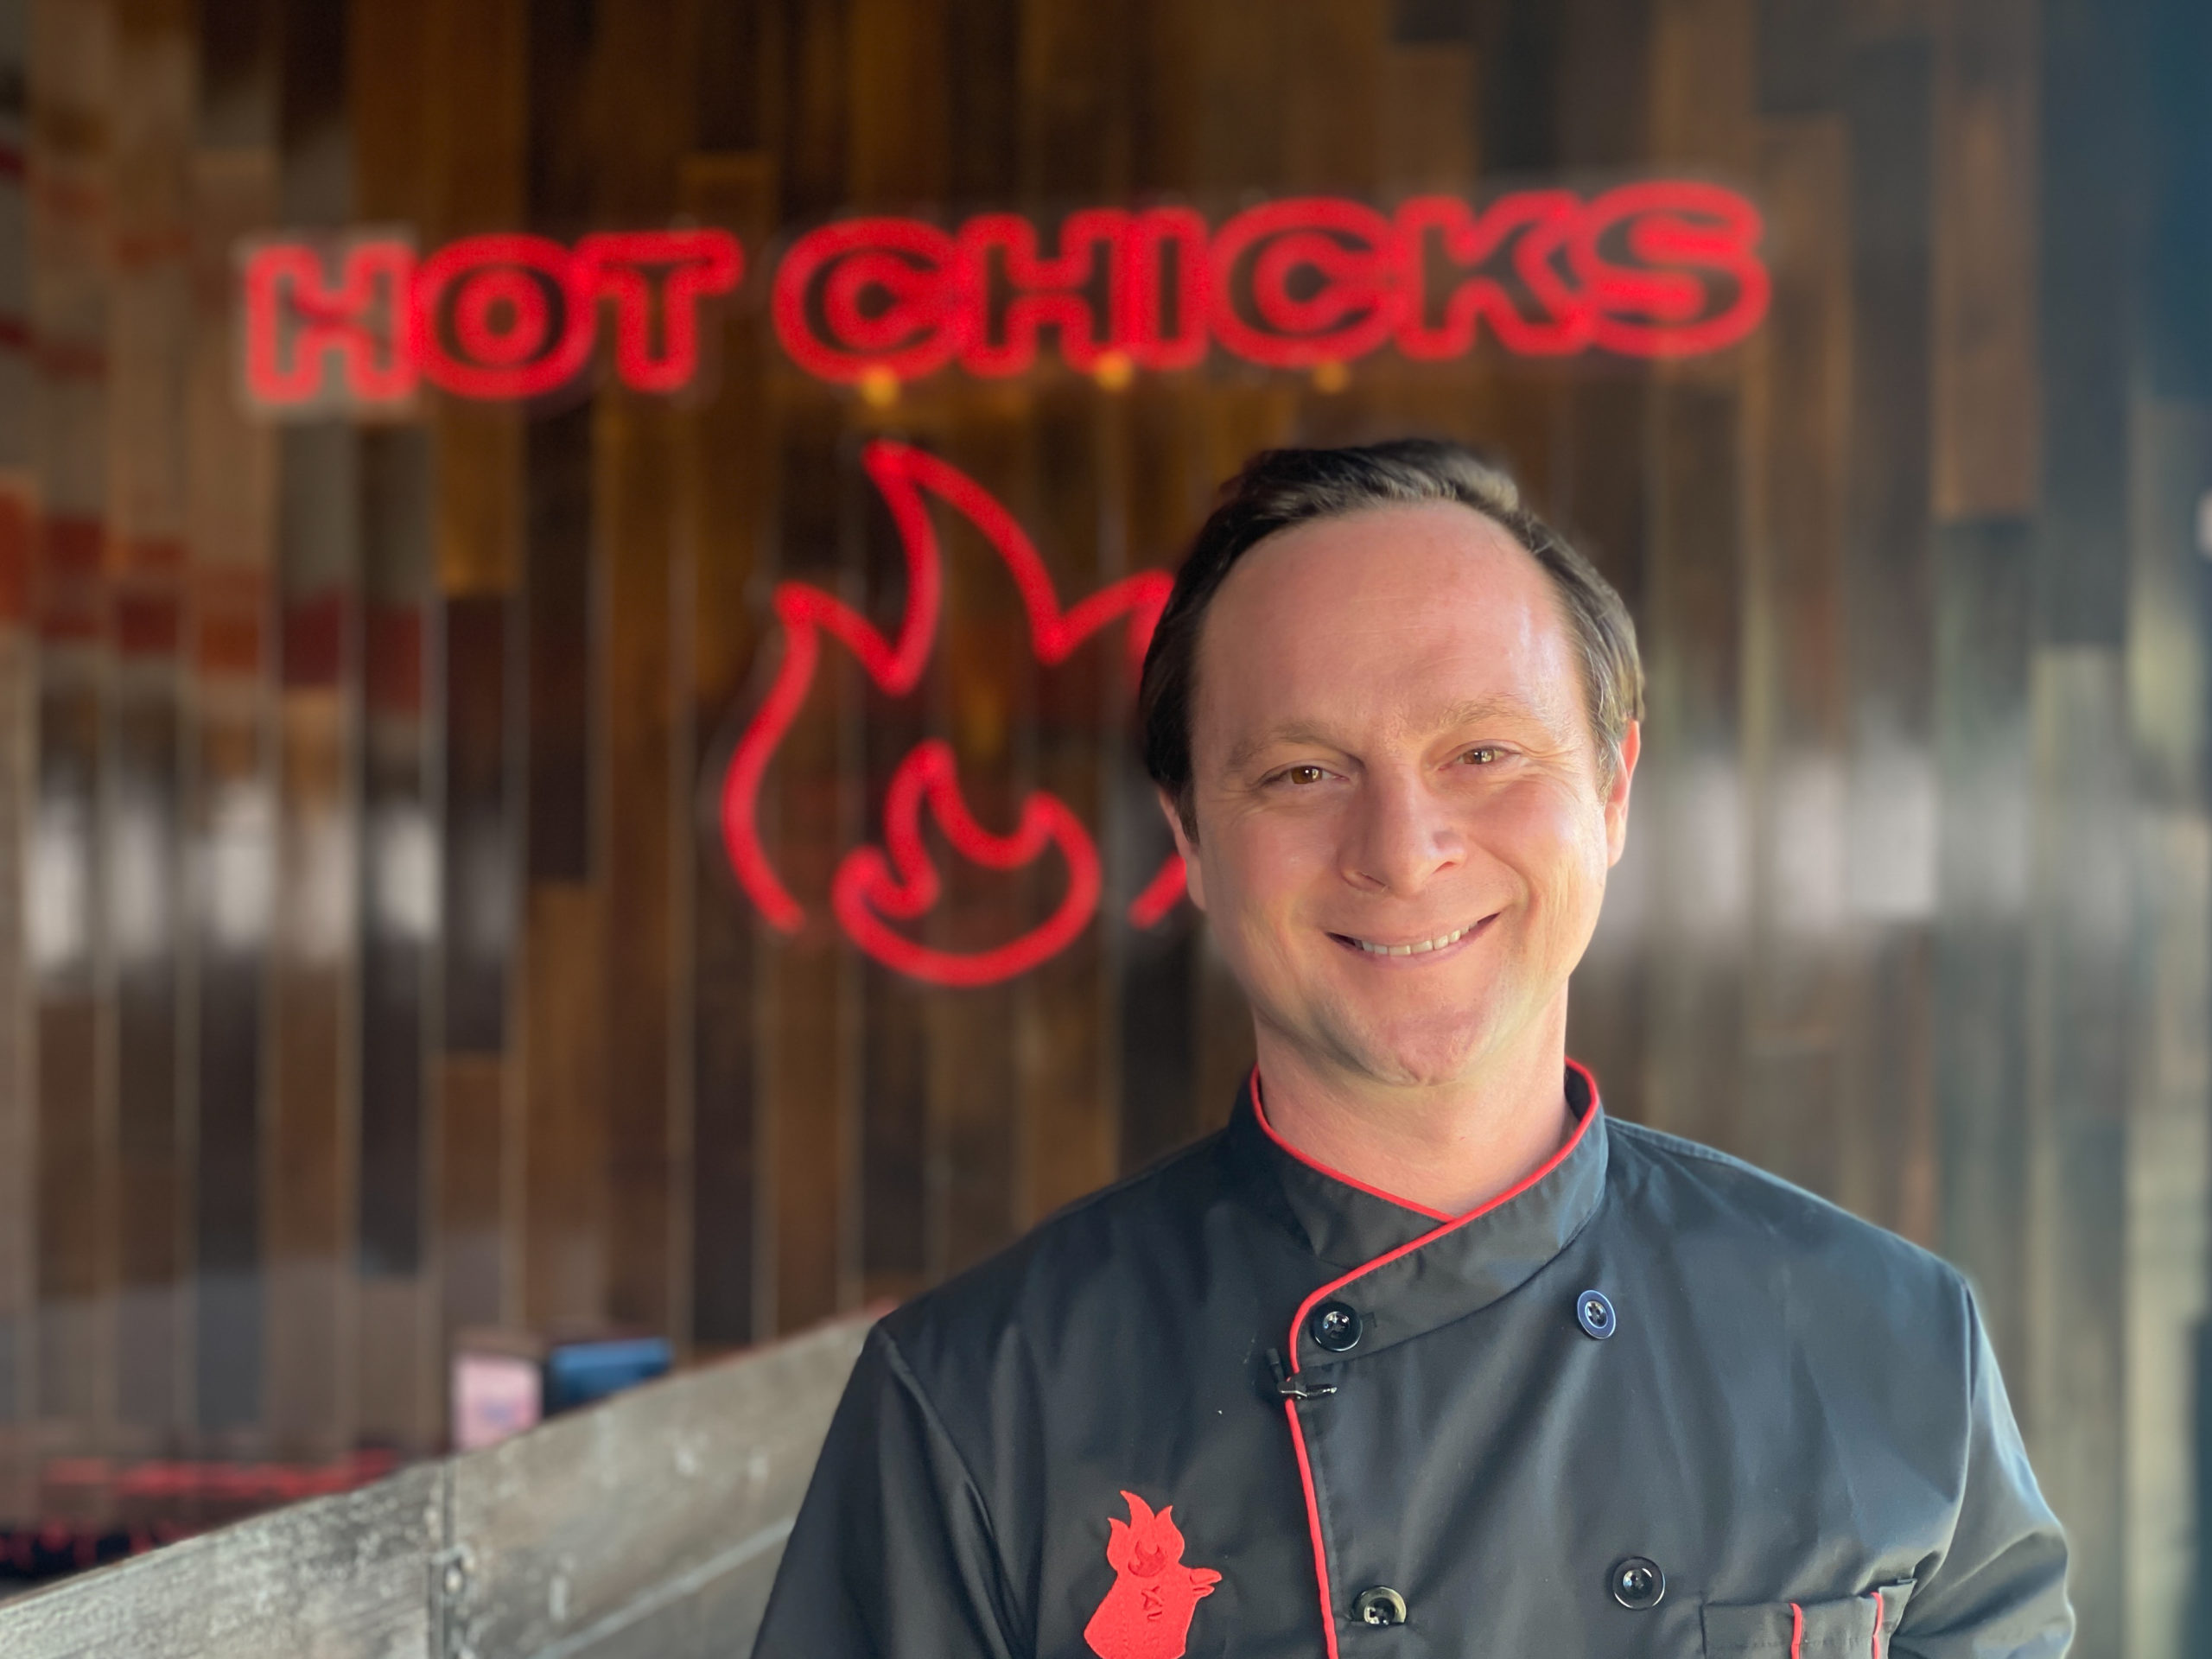 Hot Chicks owner with sign in background